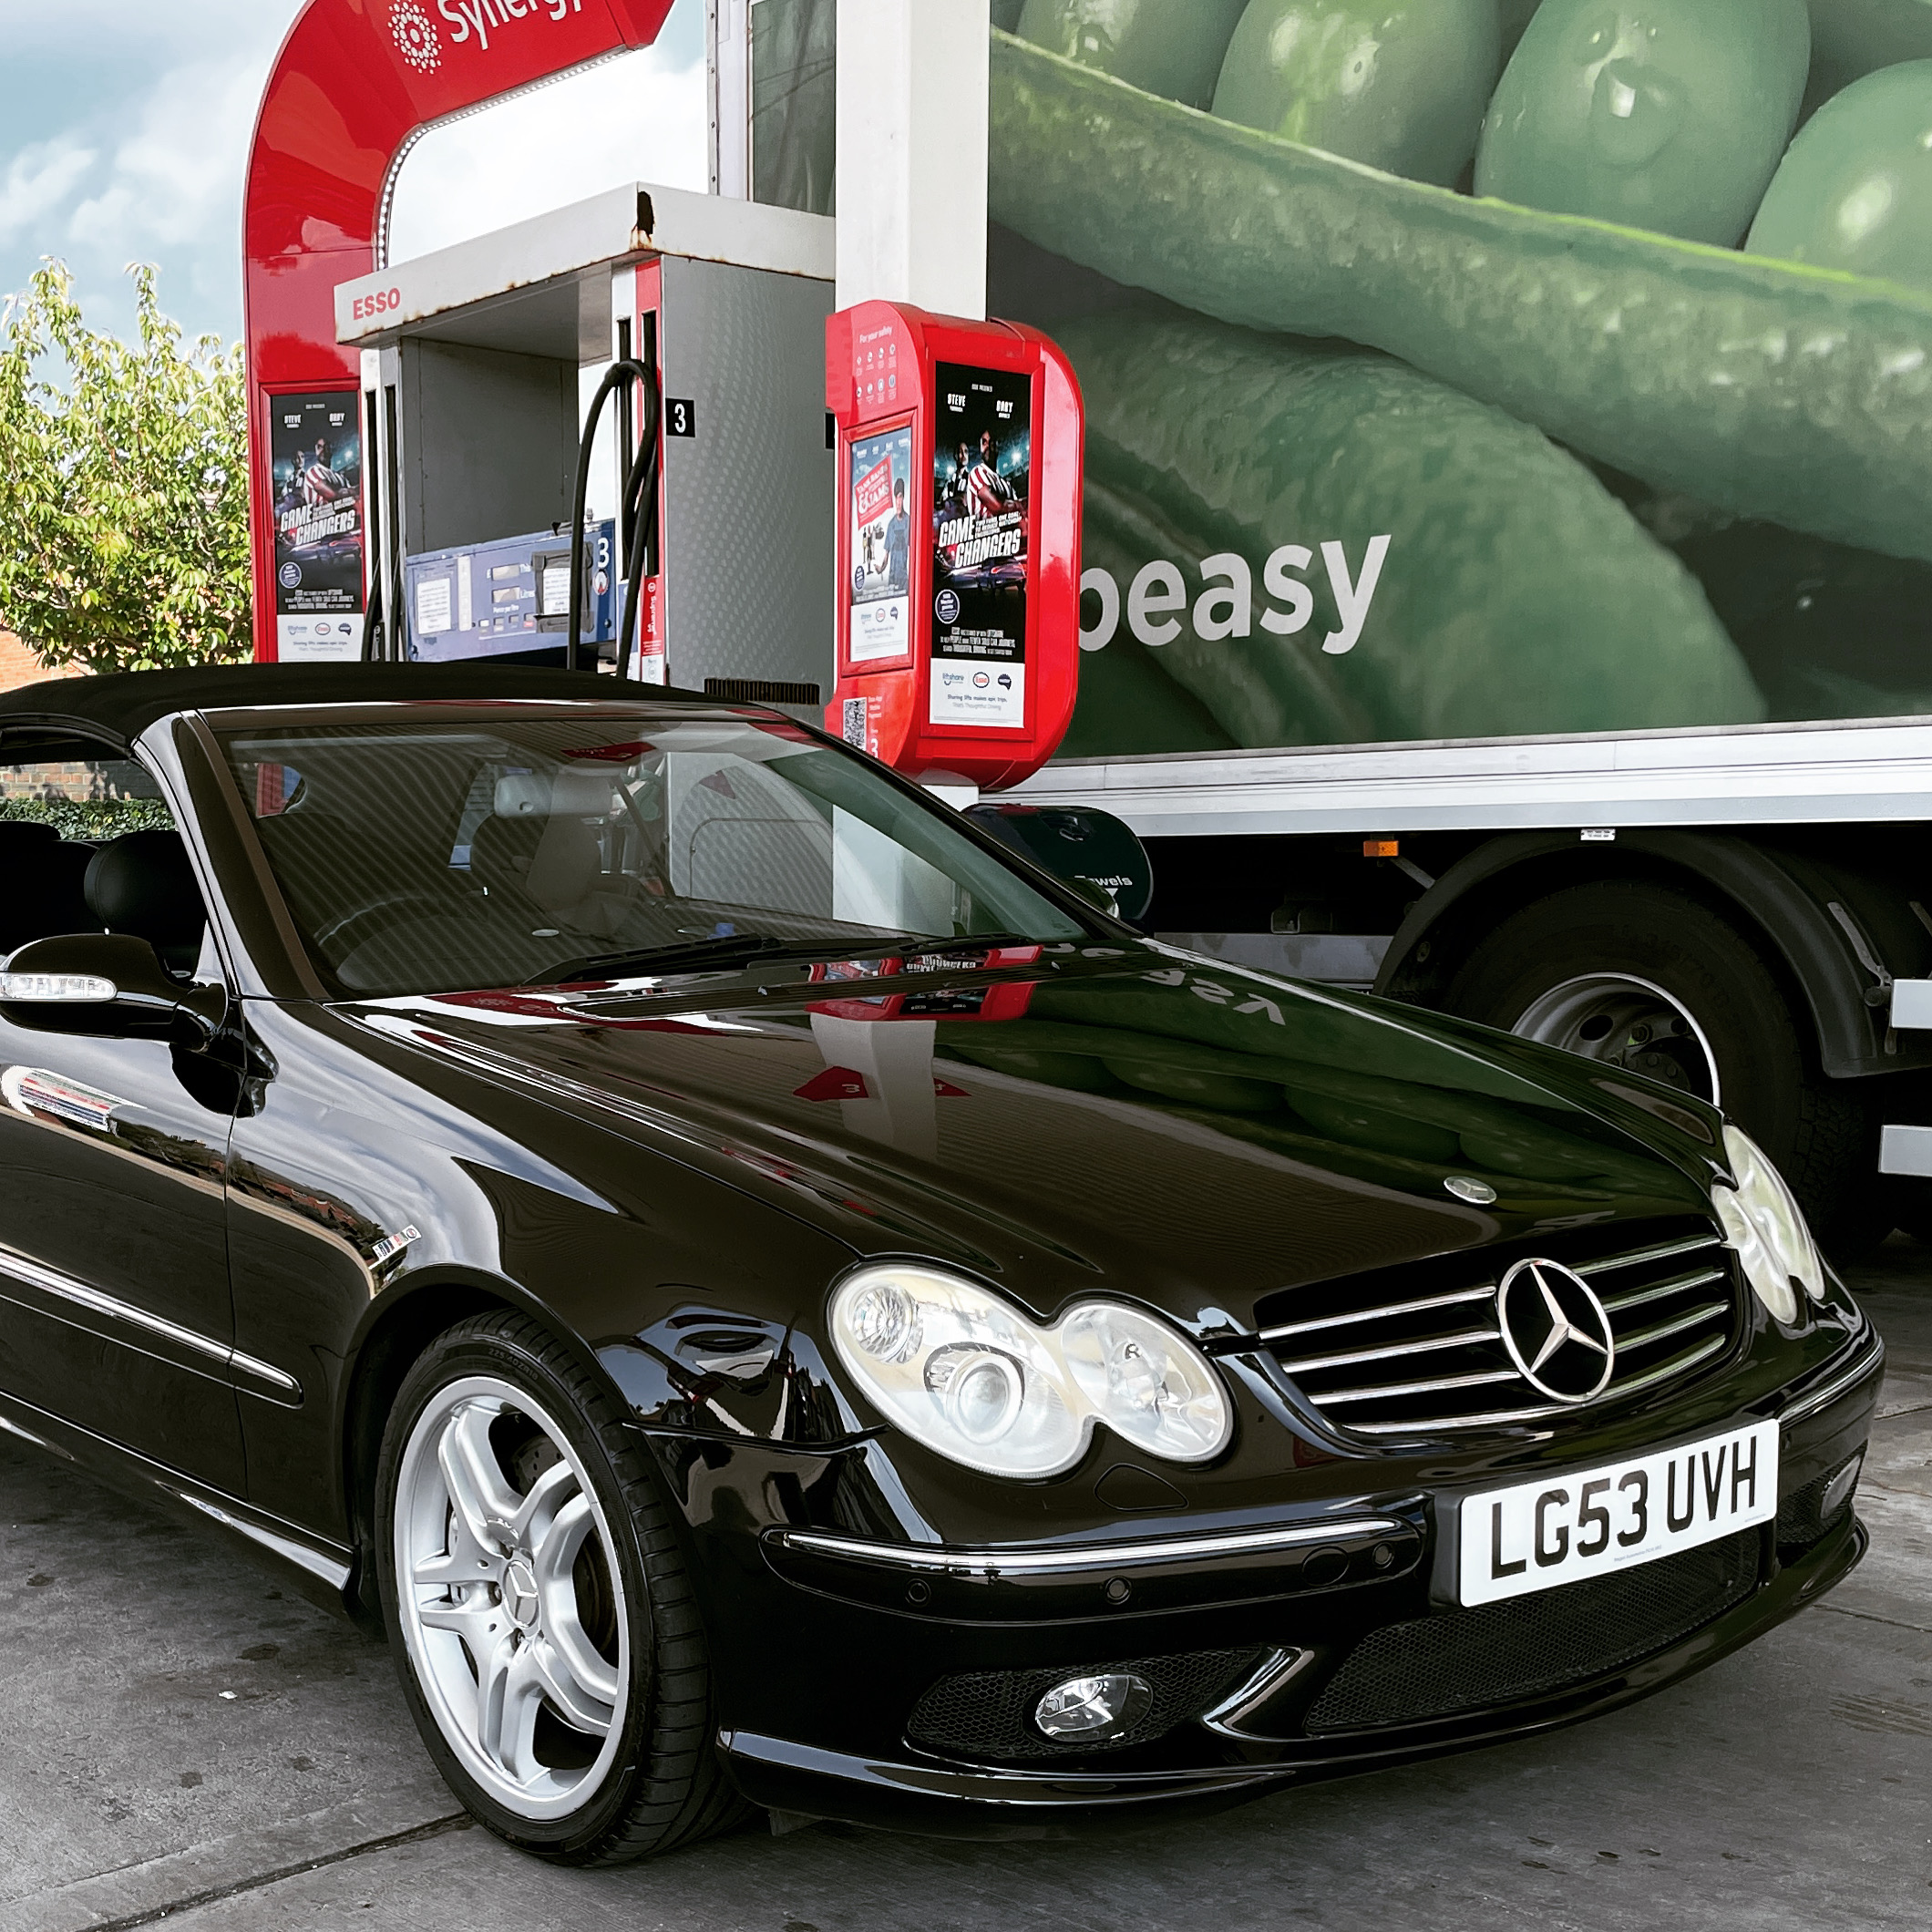 2003 Mercedes W209 CLK55 AMG daily driver - Page 3 - Readers' Cars - PistonHeads UK